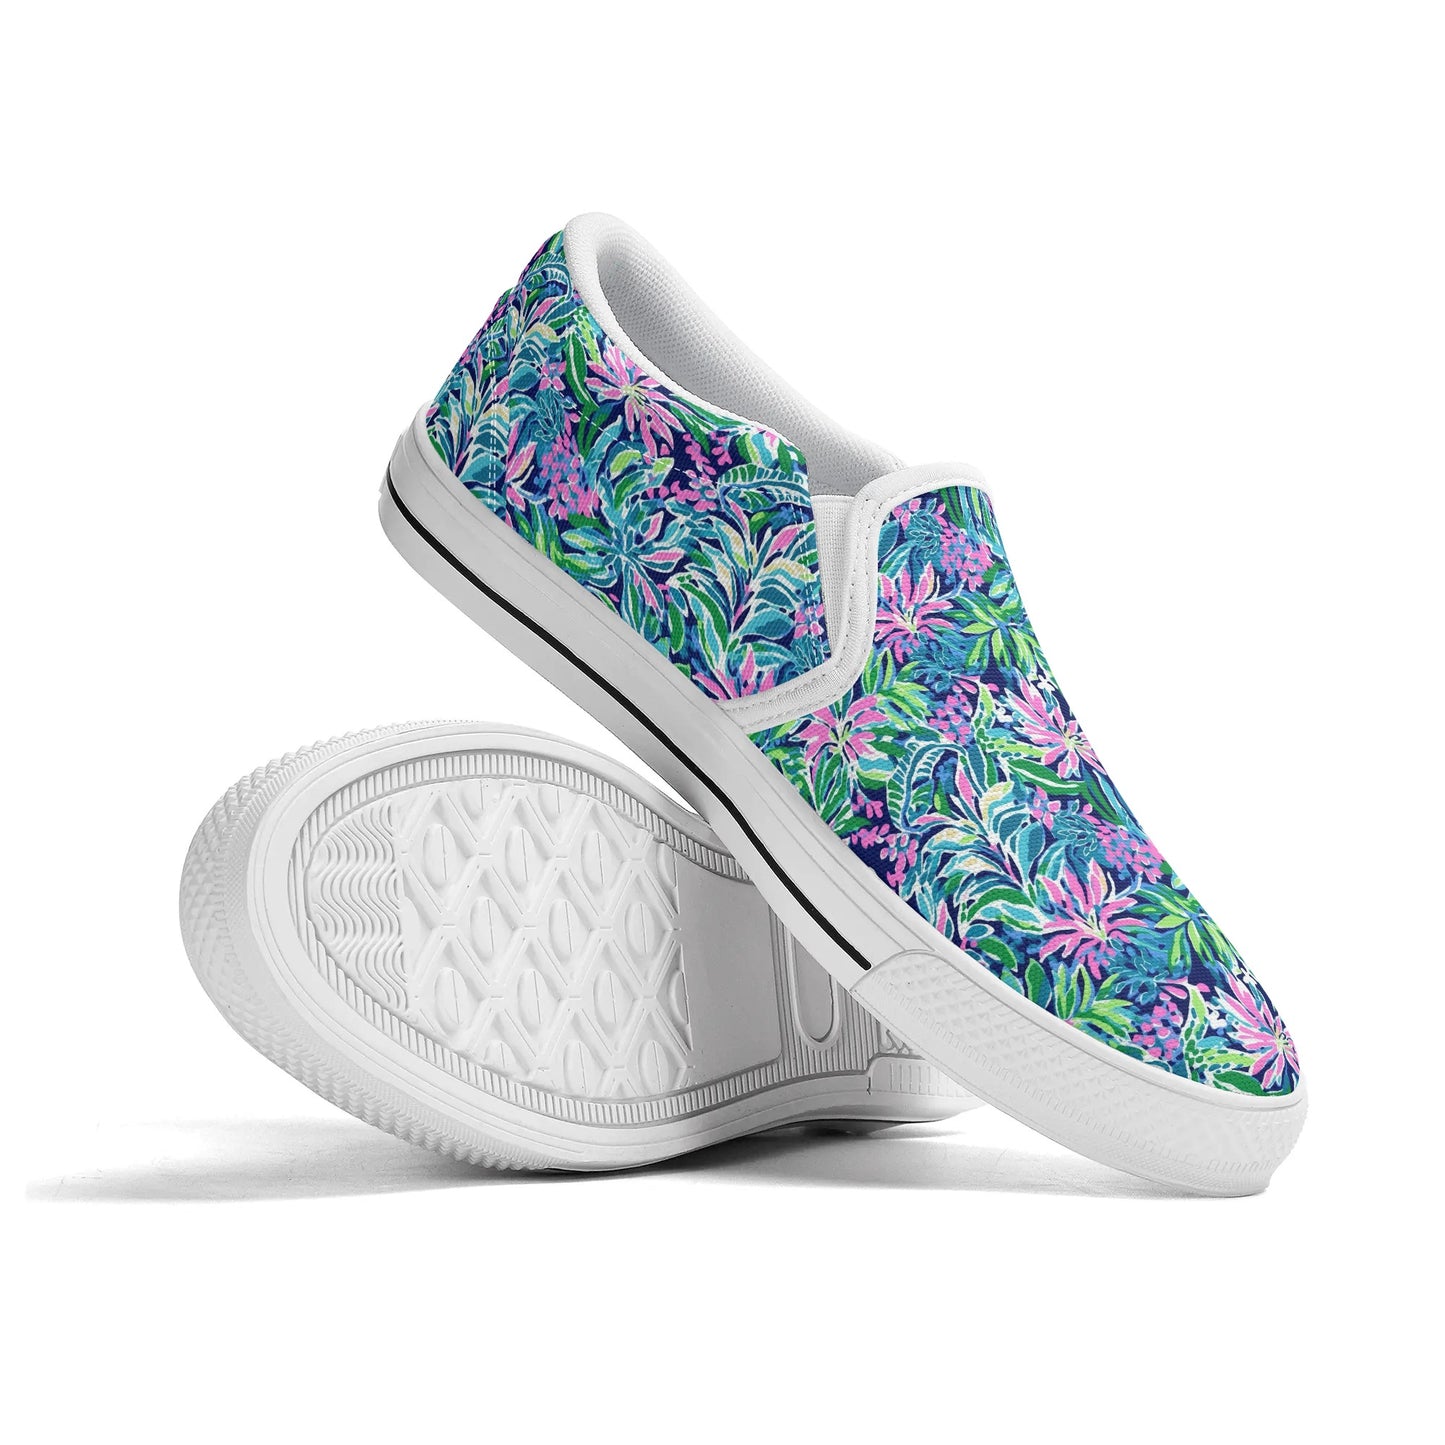 Seaside Blossoms: Coastal Spring Flowers in Pink, Green, and Navy Watercolors Womens Canvas Slip On Shoes US5-US12